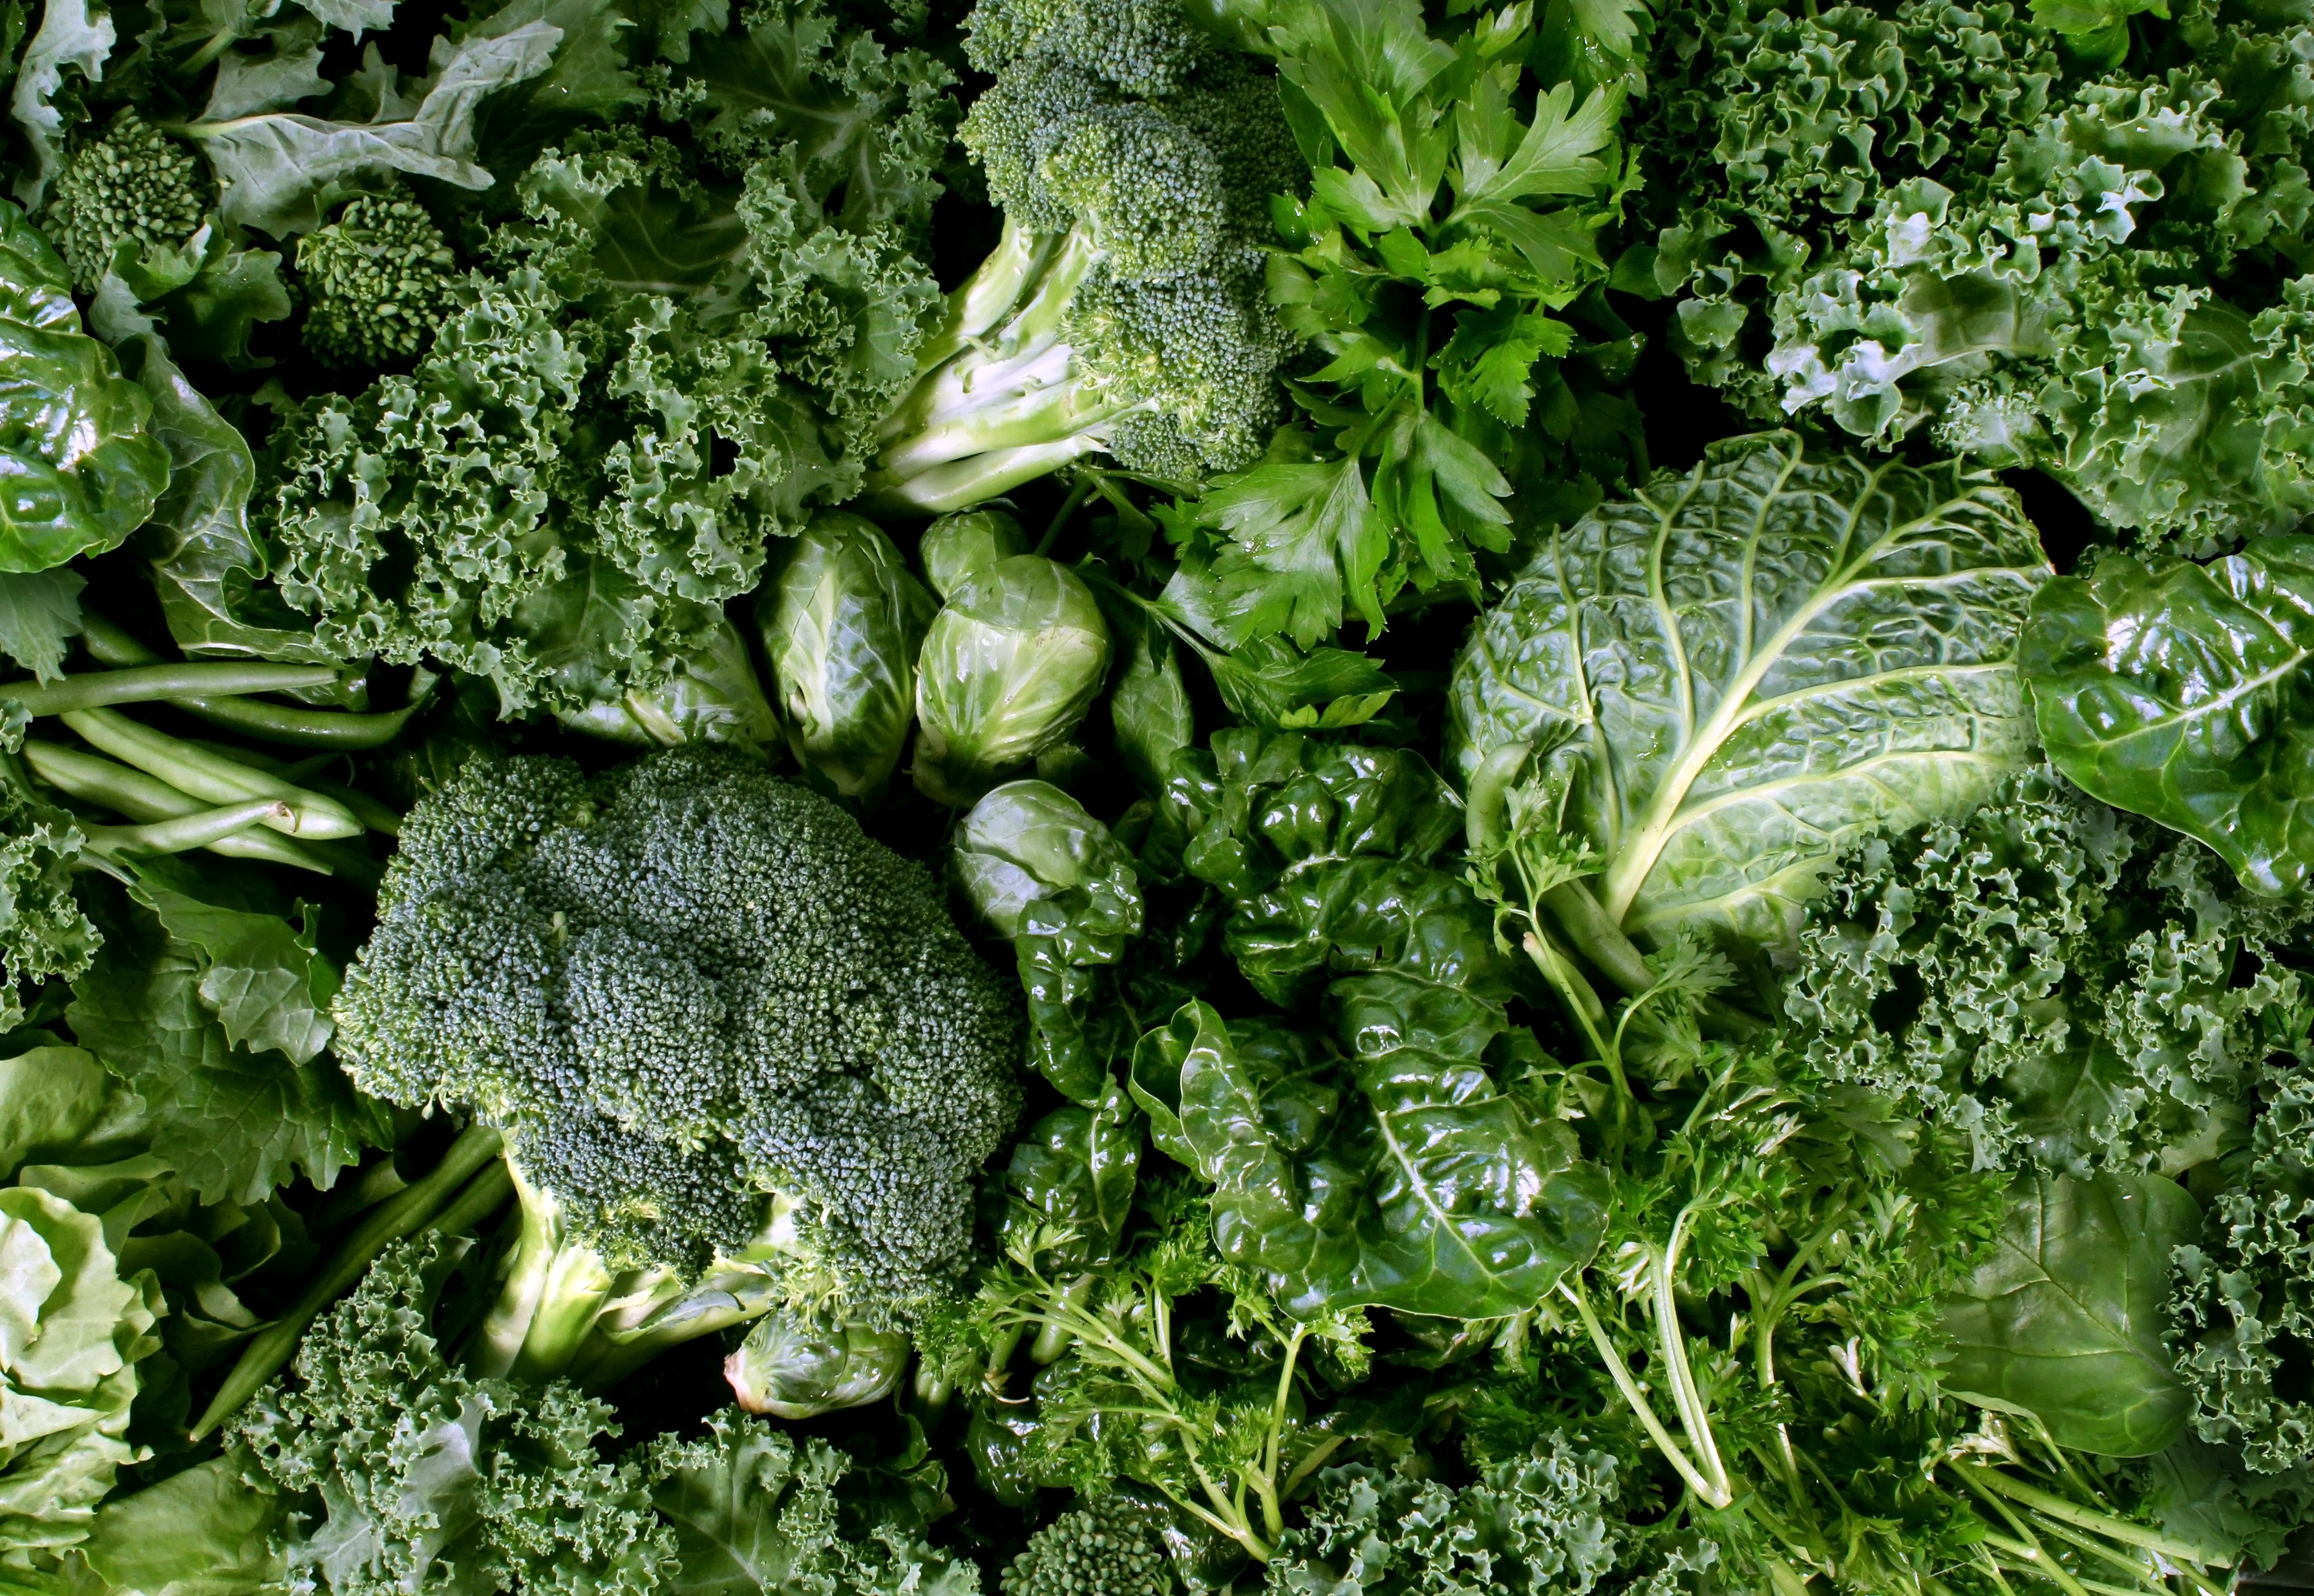 Gorgeous Leafy Greens And Their Benefits - Leafy Green Vegetables